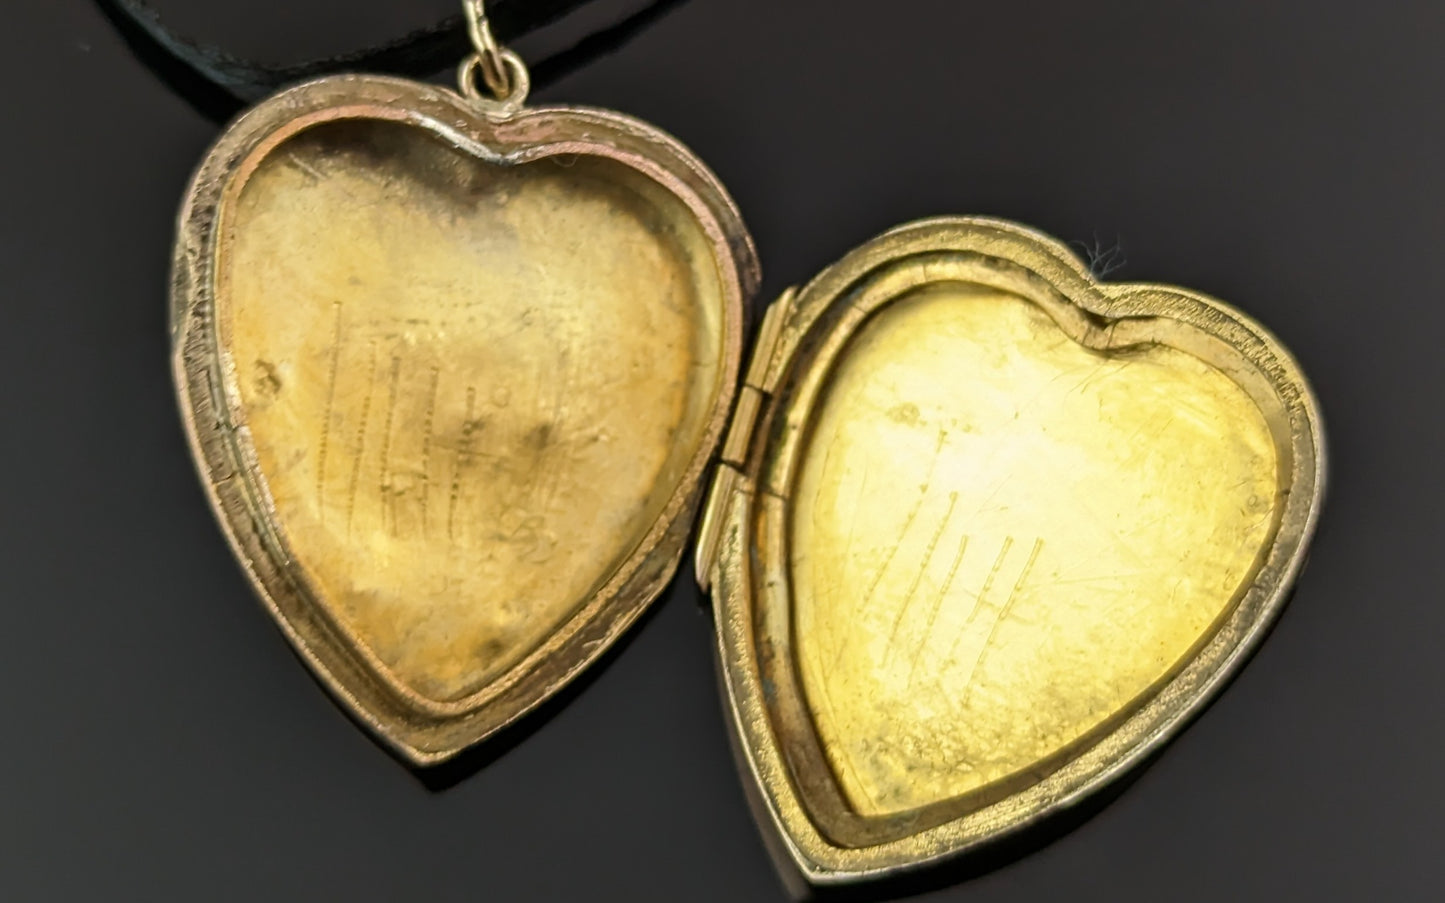 Antique love heart locket pendant, 9ct gold front and back, Edwardian